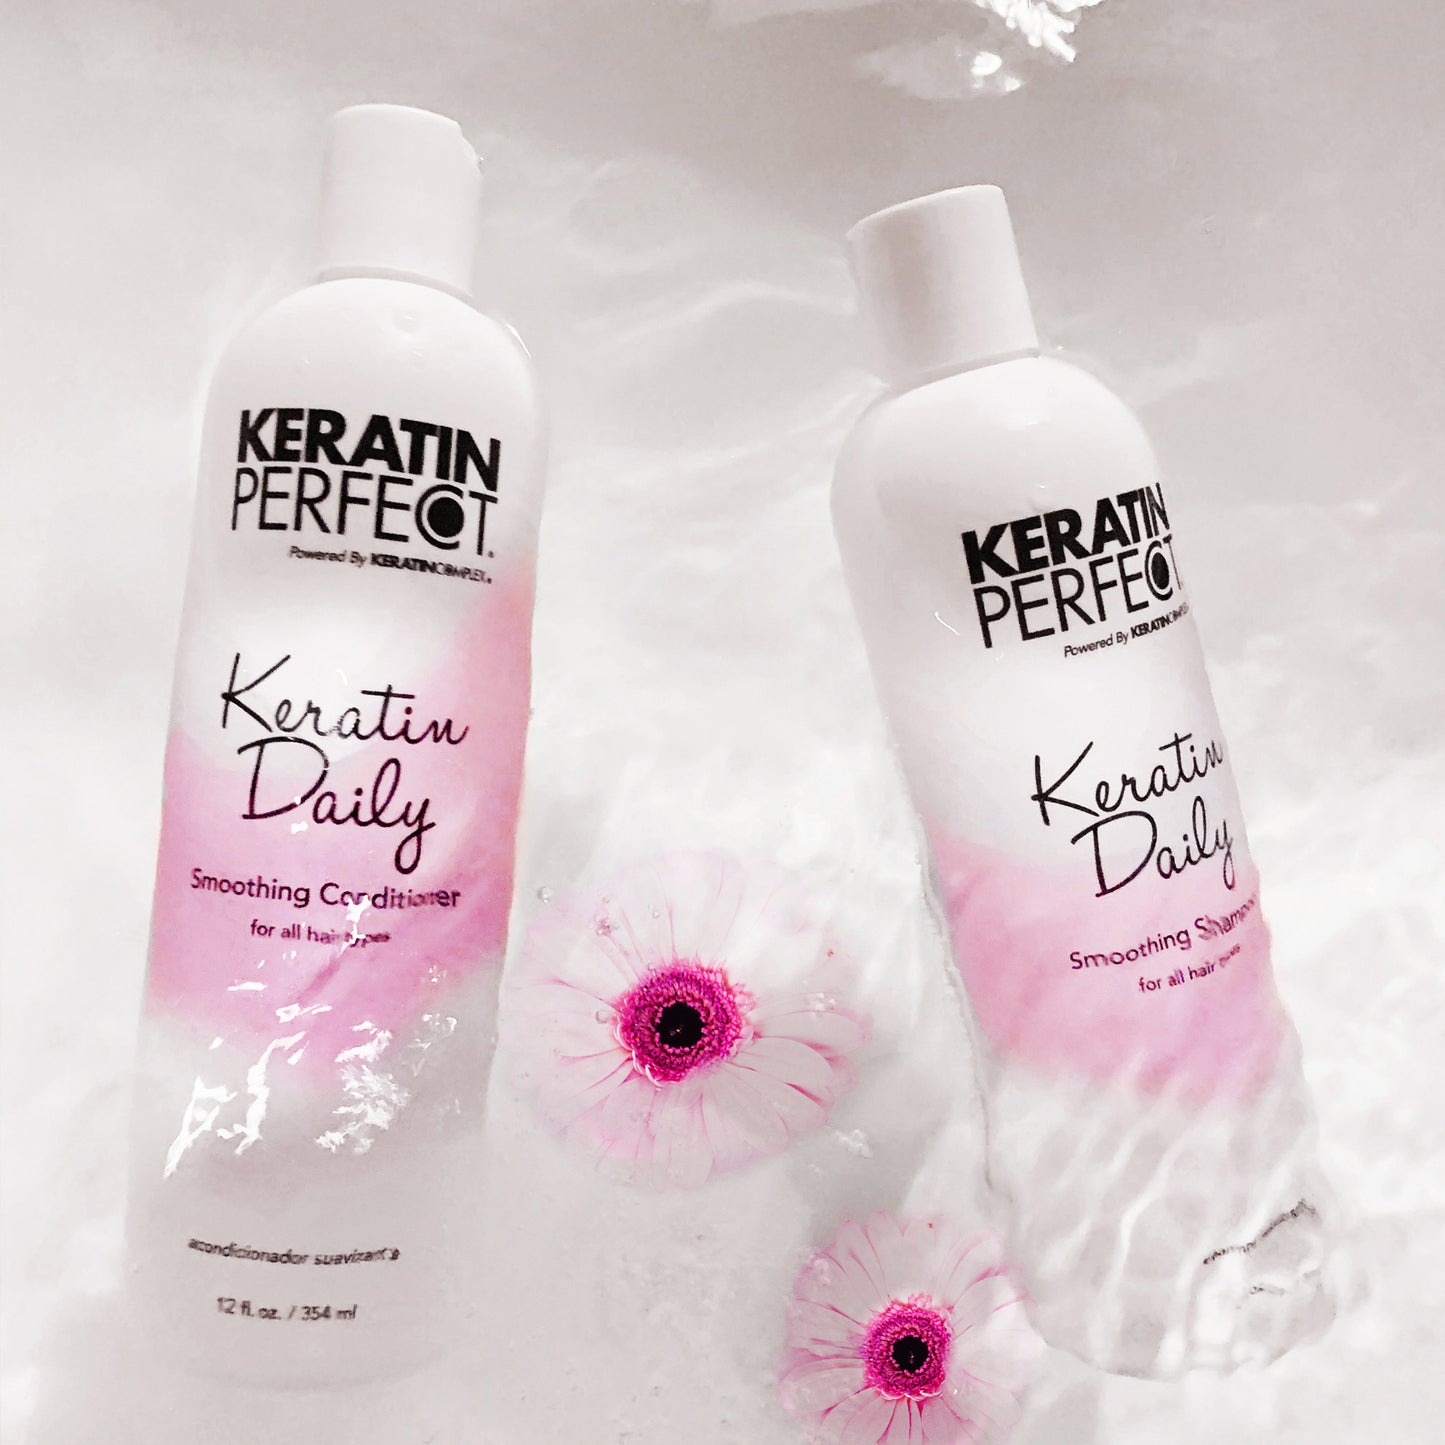 Keratin Daily Smoothing Conditioner